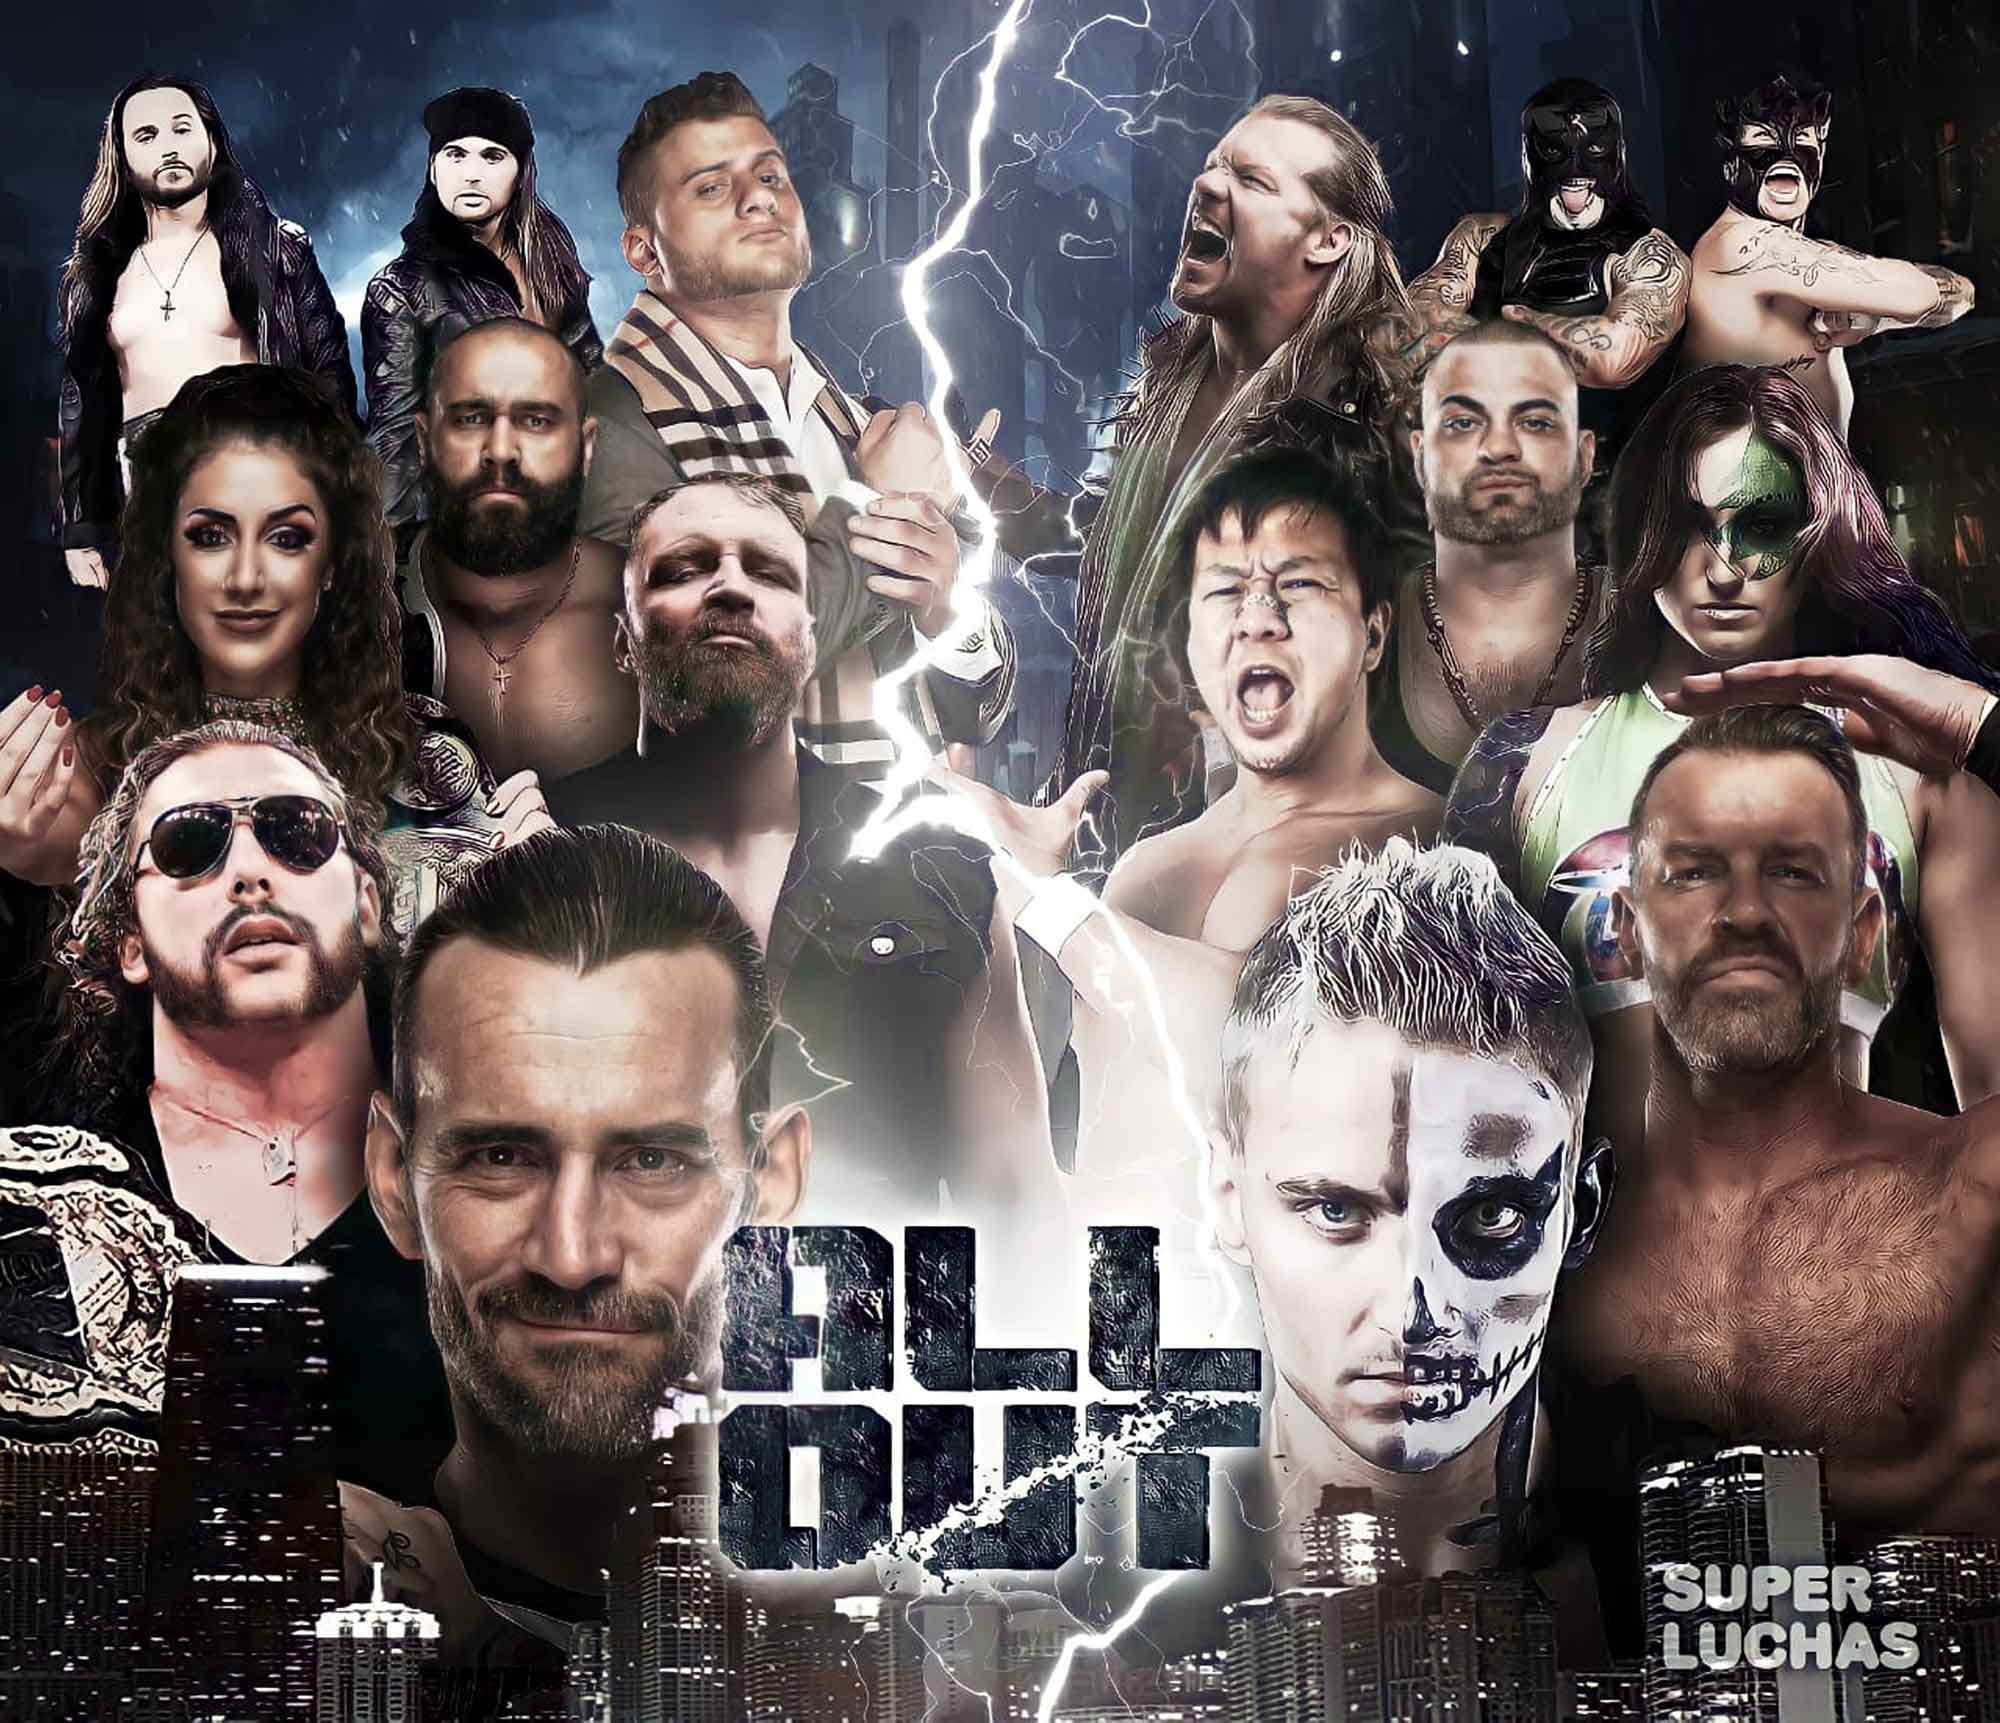 AEW ALL OUT 2021. Live results. CM Punk vs. Darby allin